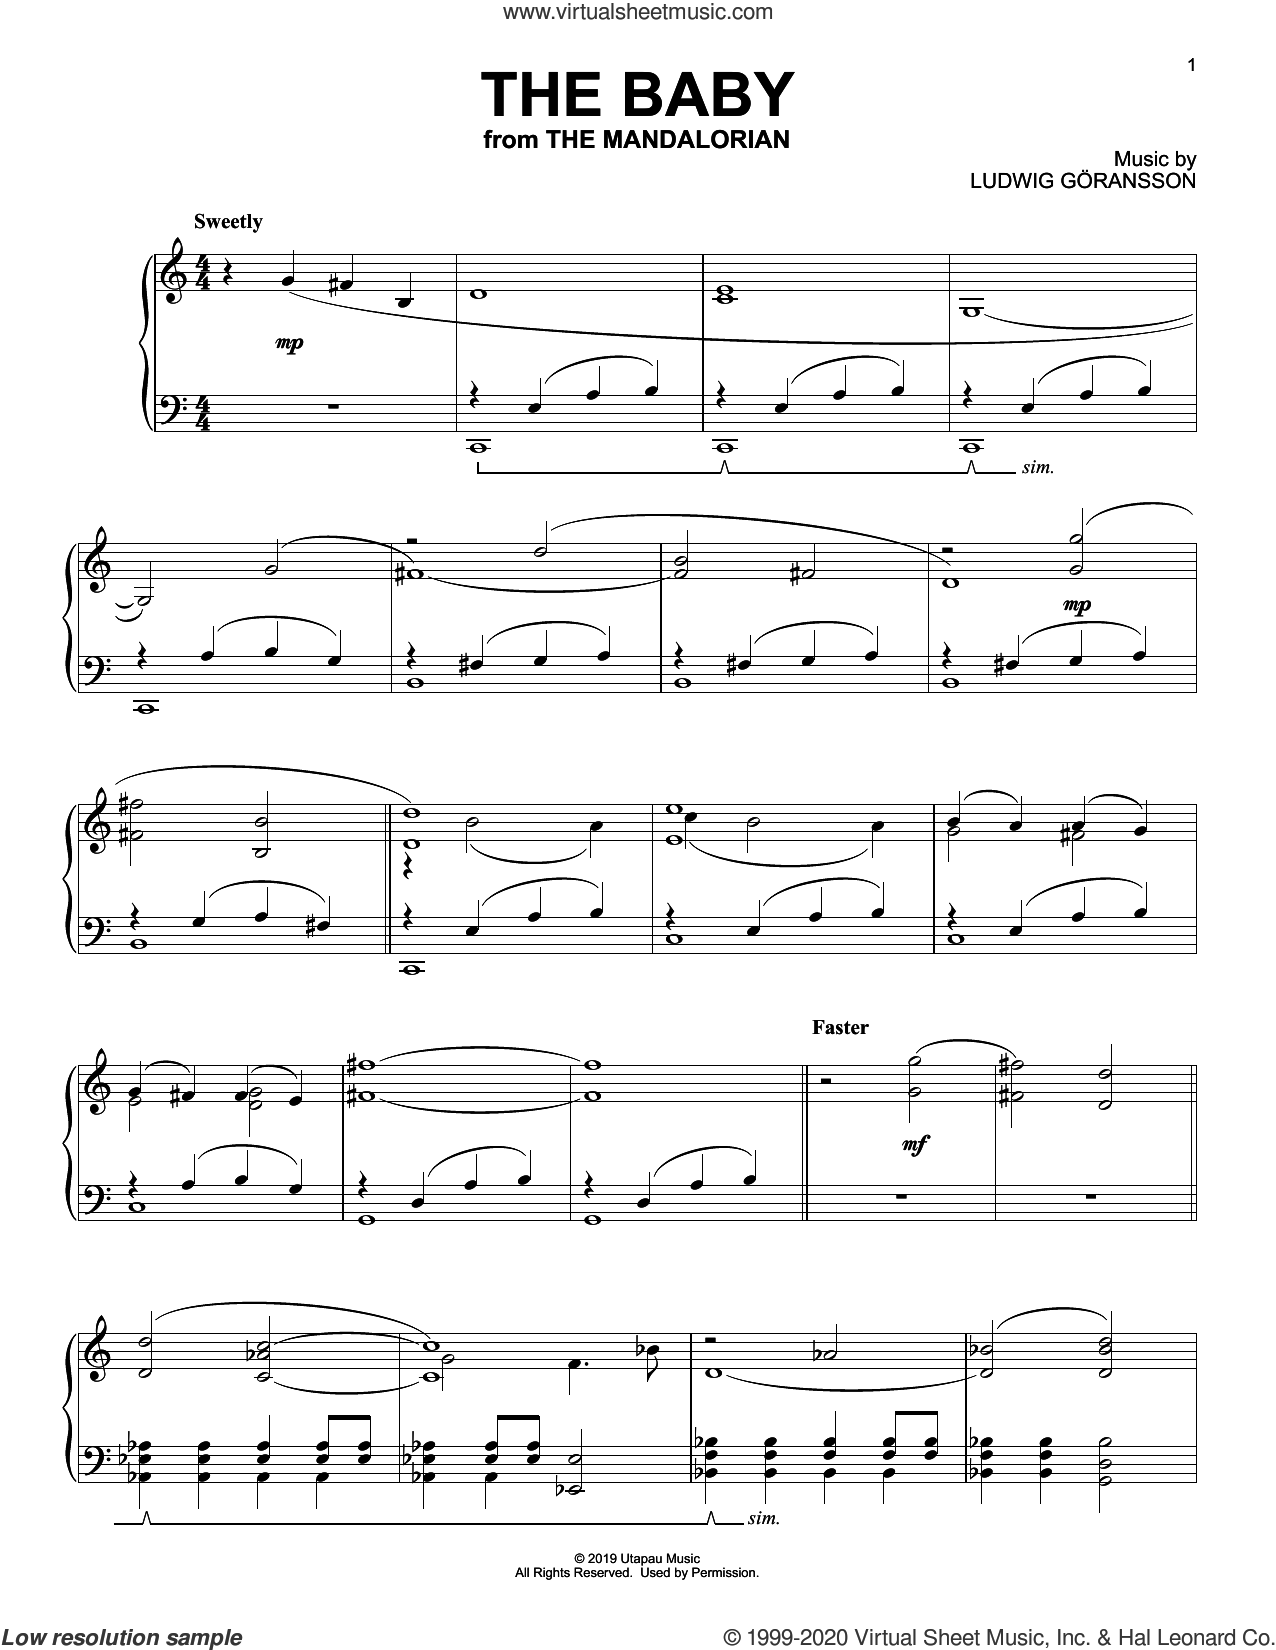 Göransson - The Baby (from Star Wars: The Mandalorian) sheet music for